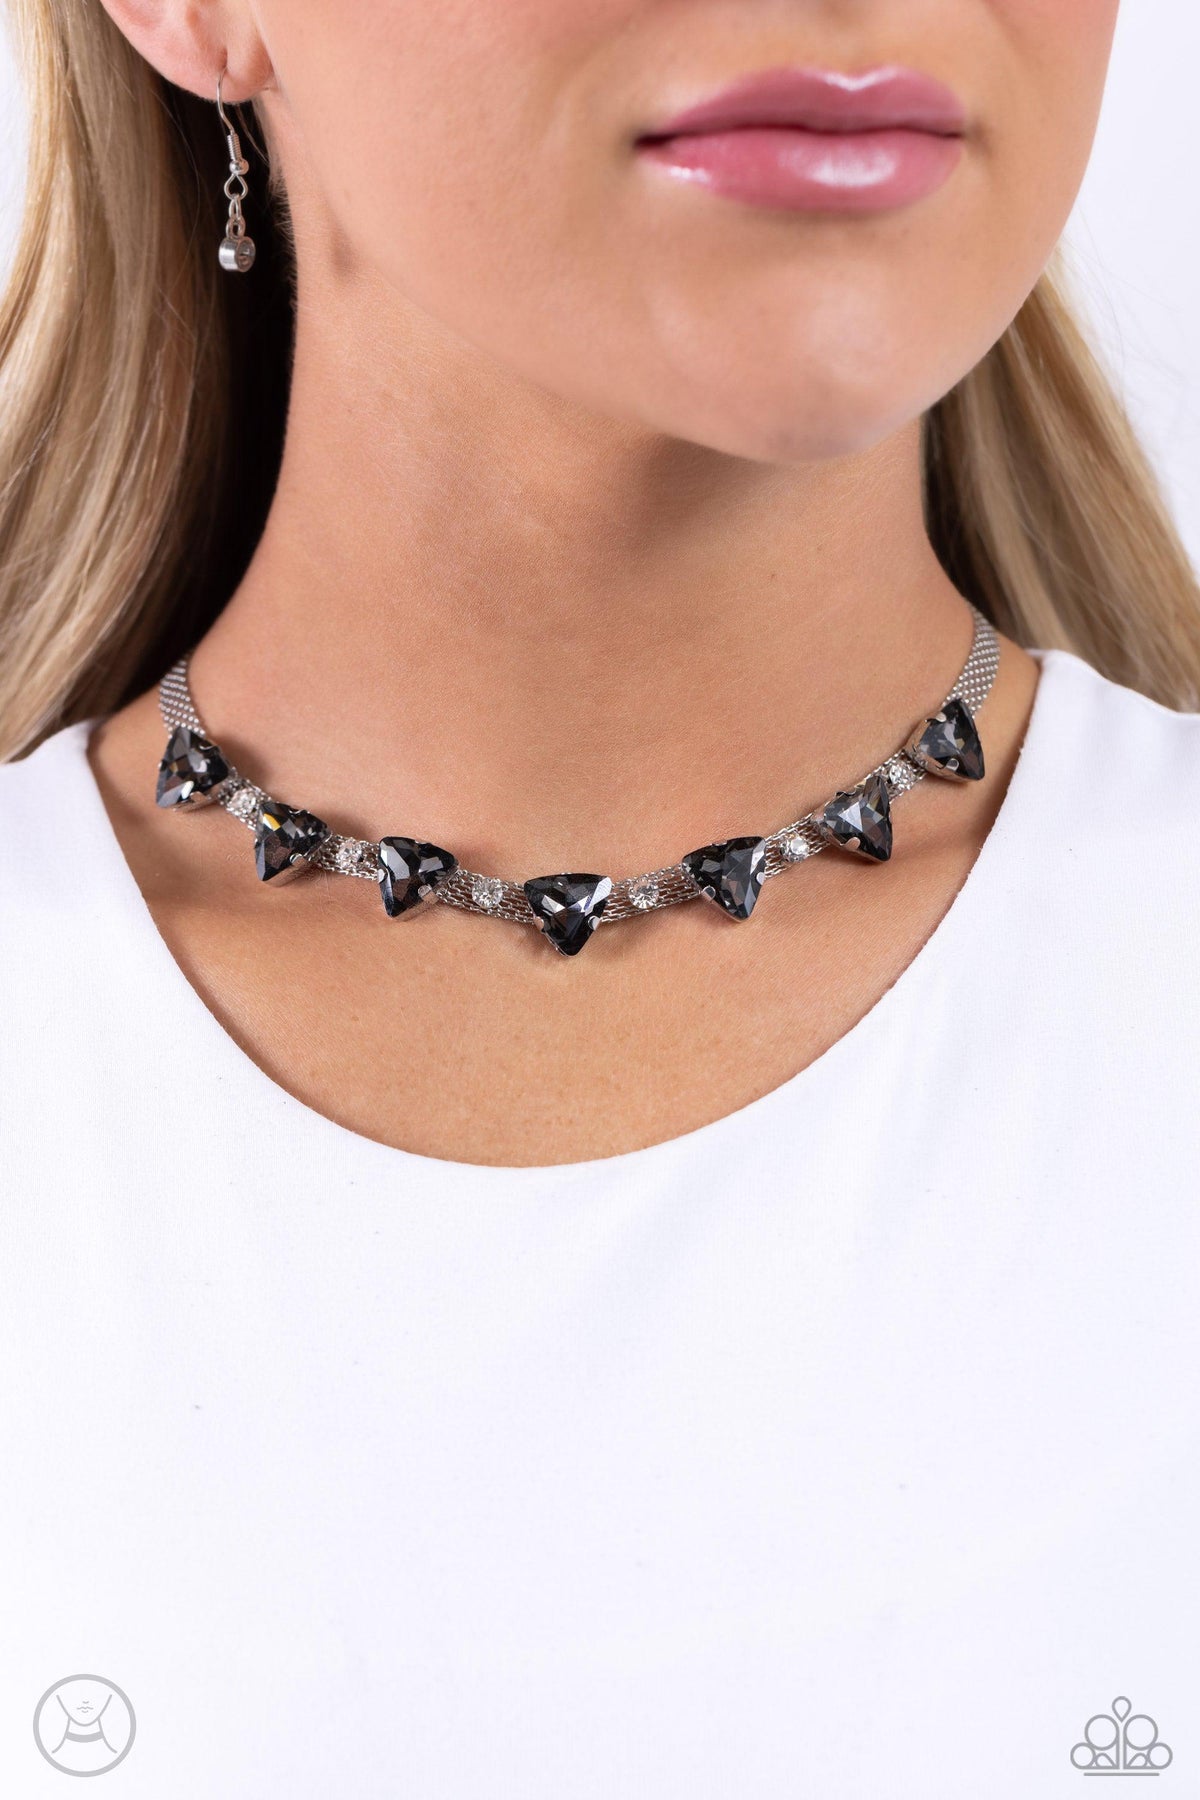 Strands of Sass Silver Rhinestone Choker Necklace - Paparazzi Accessories-on model - CarasShop.com - $5 Jewelry by Cara Jewels